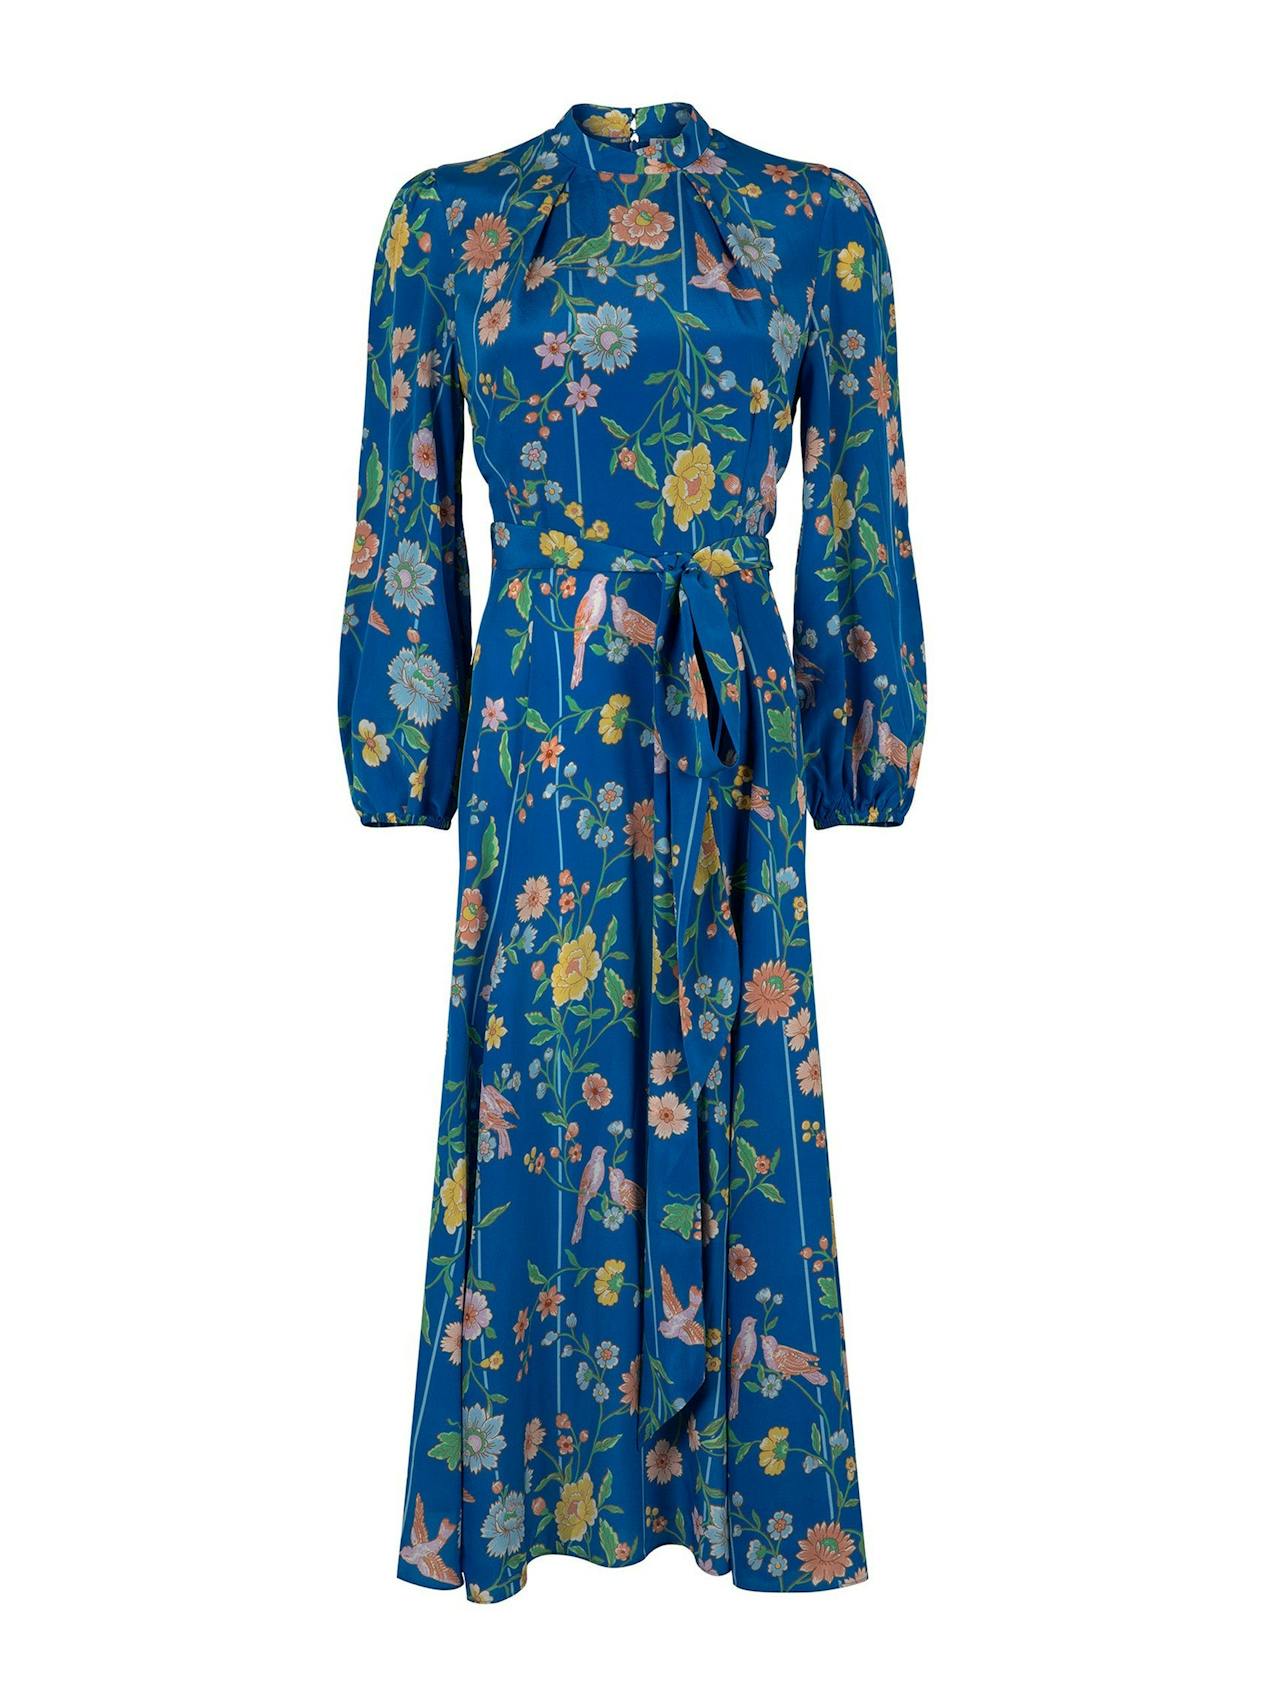 Bright blue Sonia bamboo and birds dress